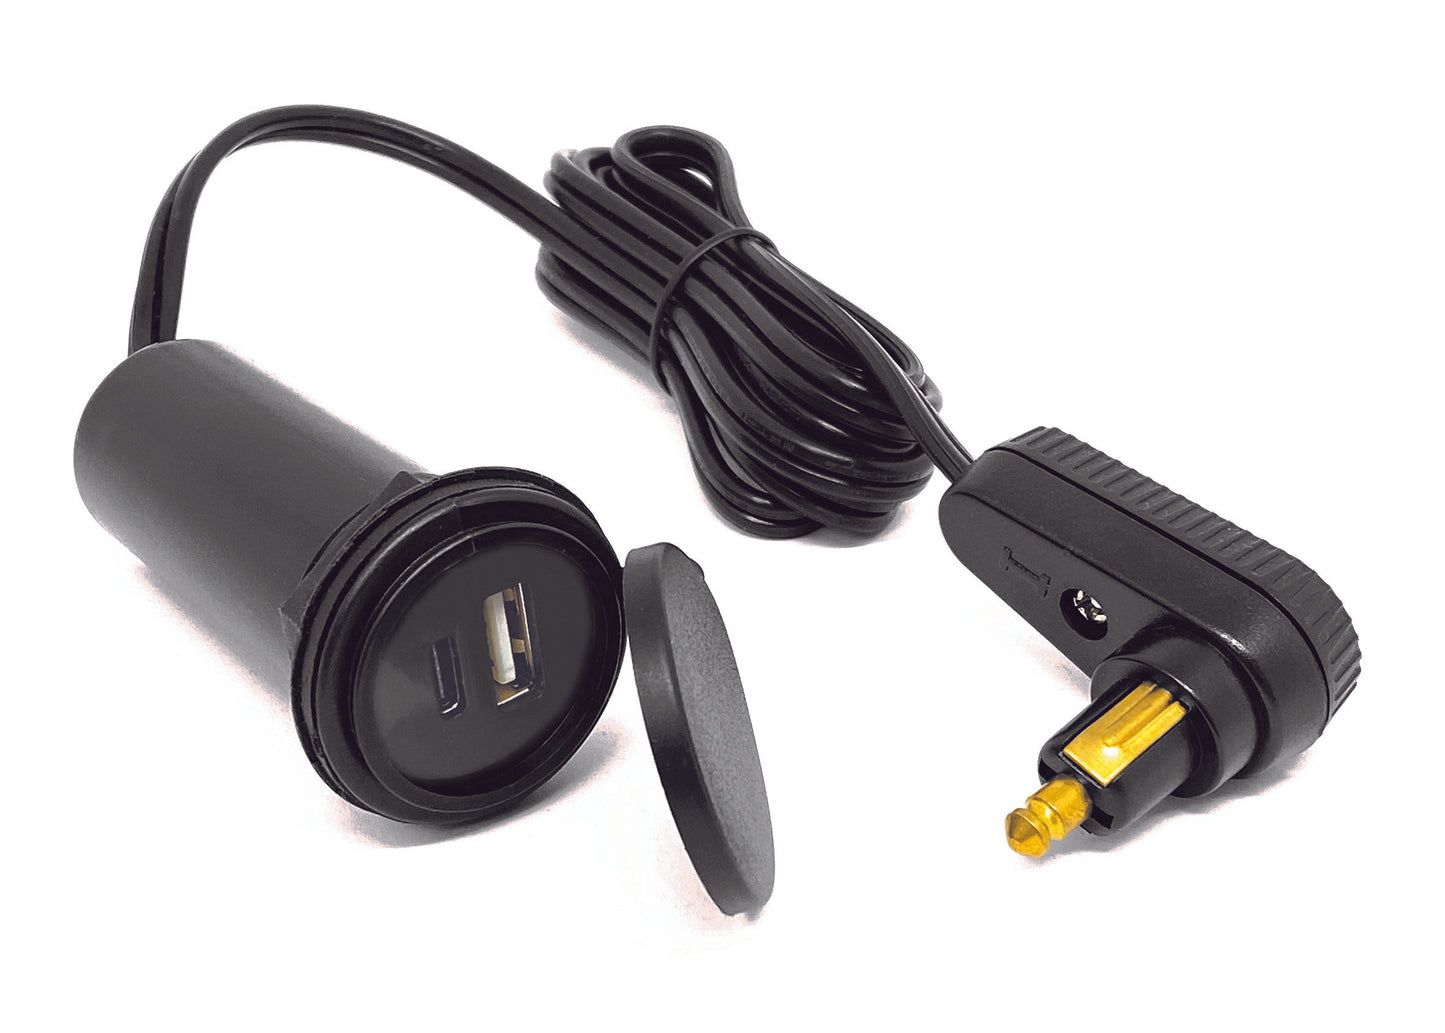 USB tank bag cable with twin charger (USB-A and USB-C) and right angle DIN connector